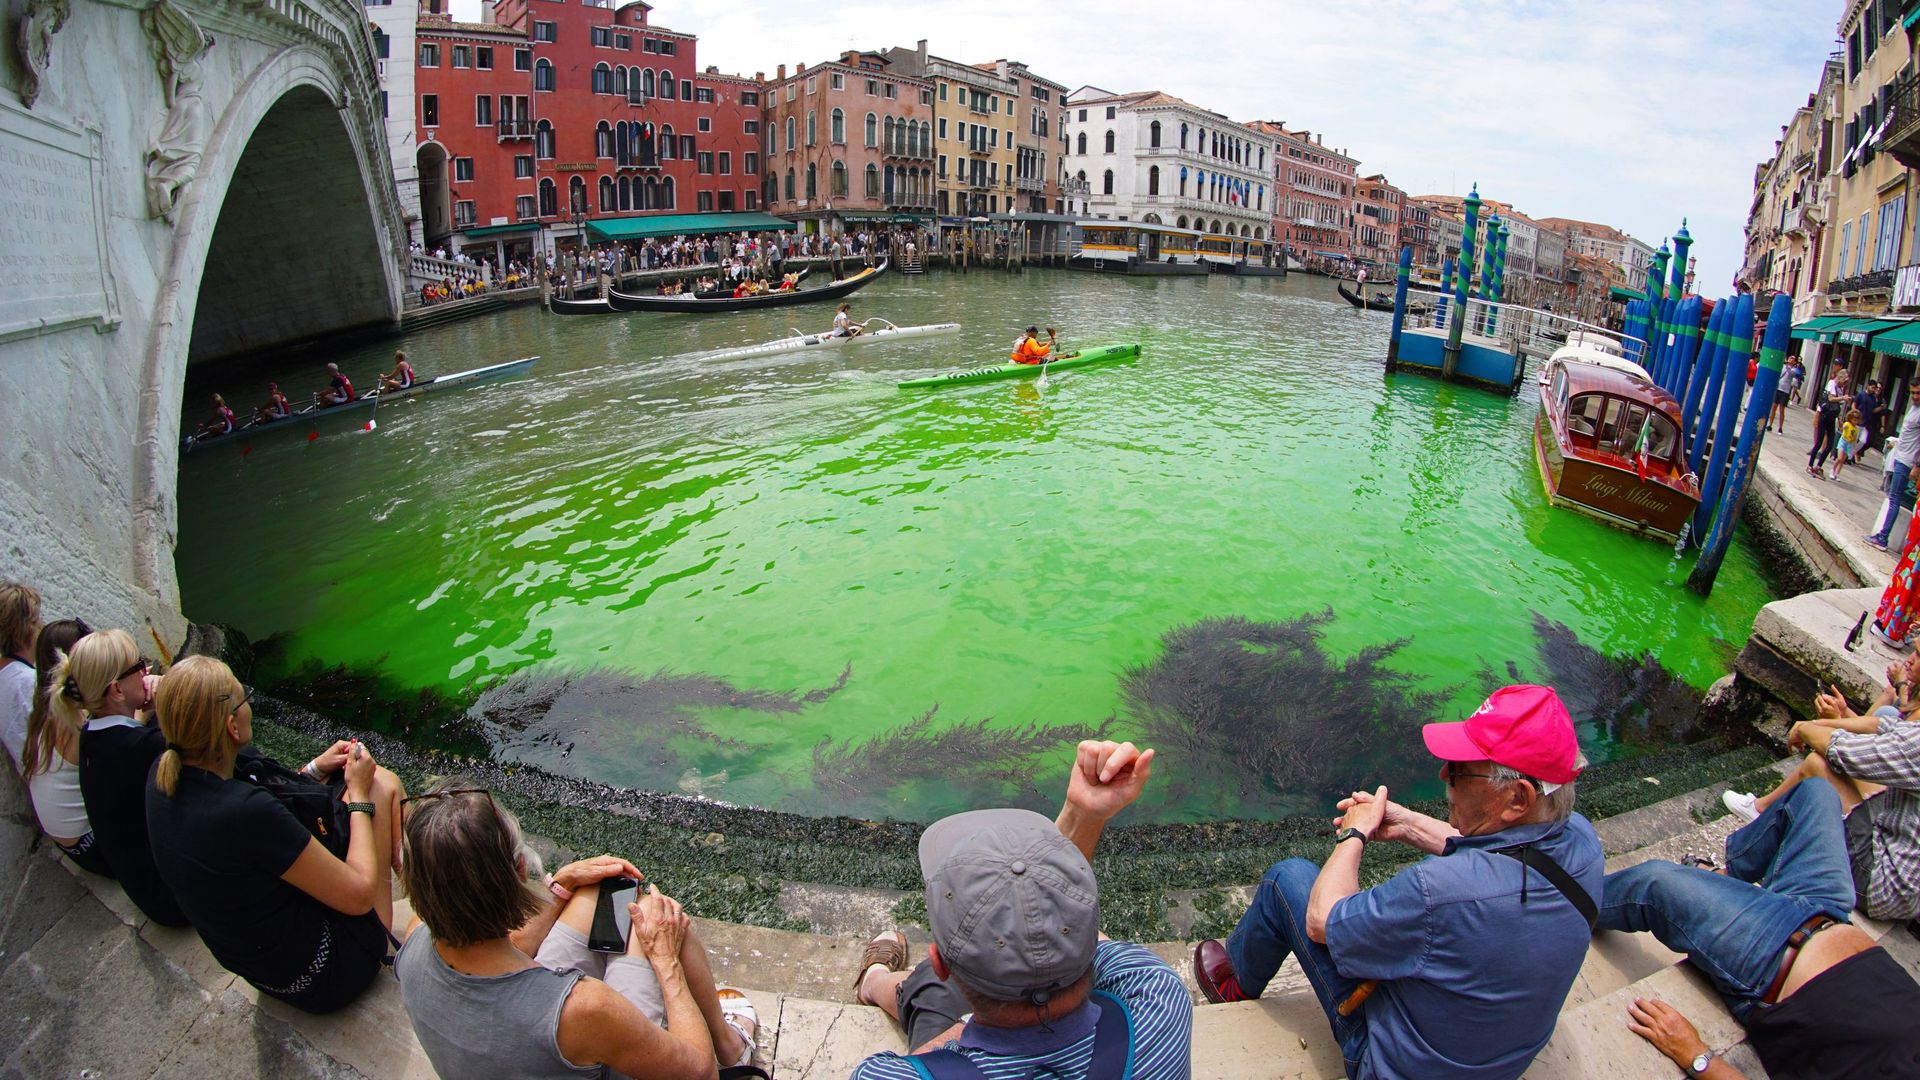 People below the Rialto Bridge in Venice's Grand Canal on May 28.